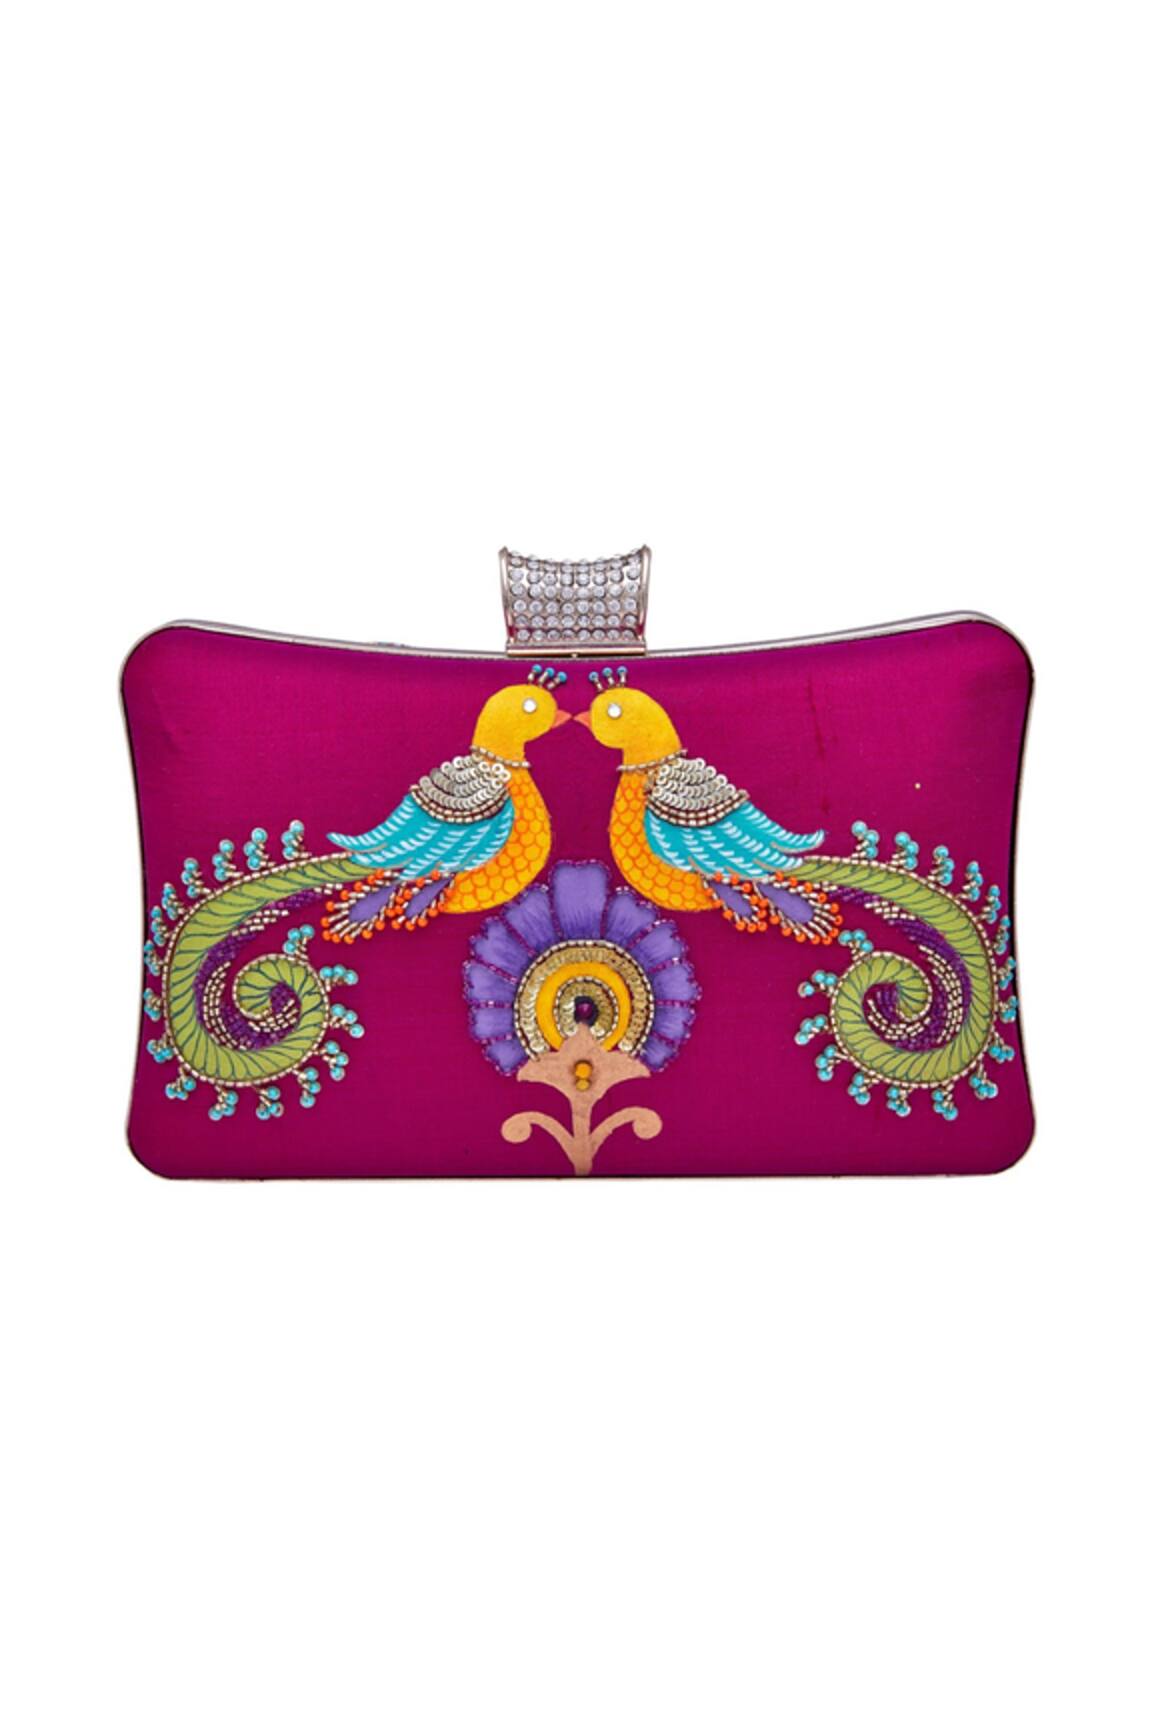 Crazy Palette Peacock motif embroidered clutch